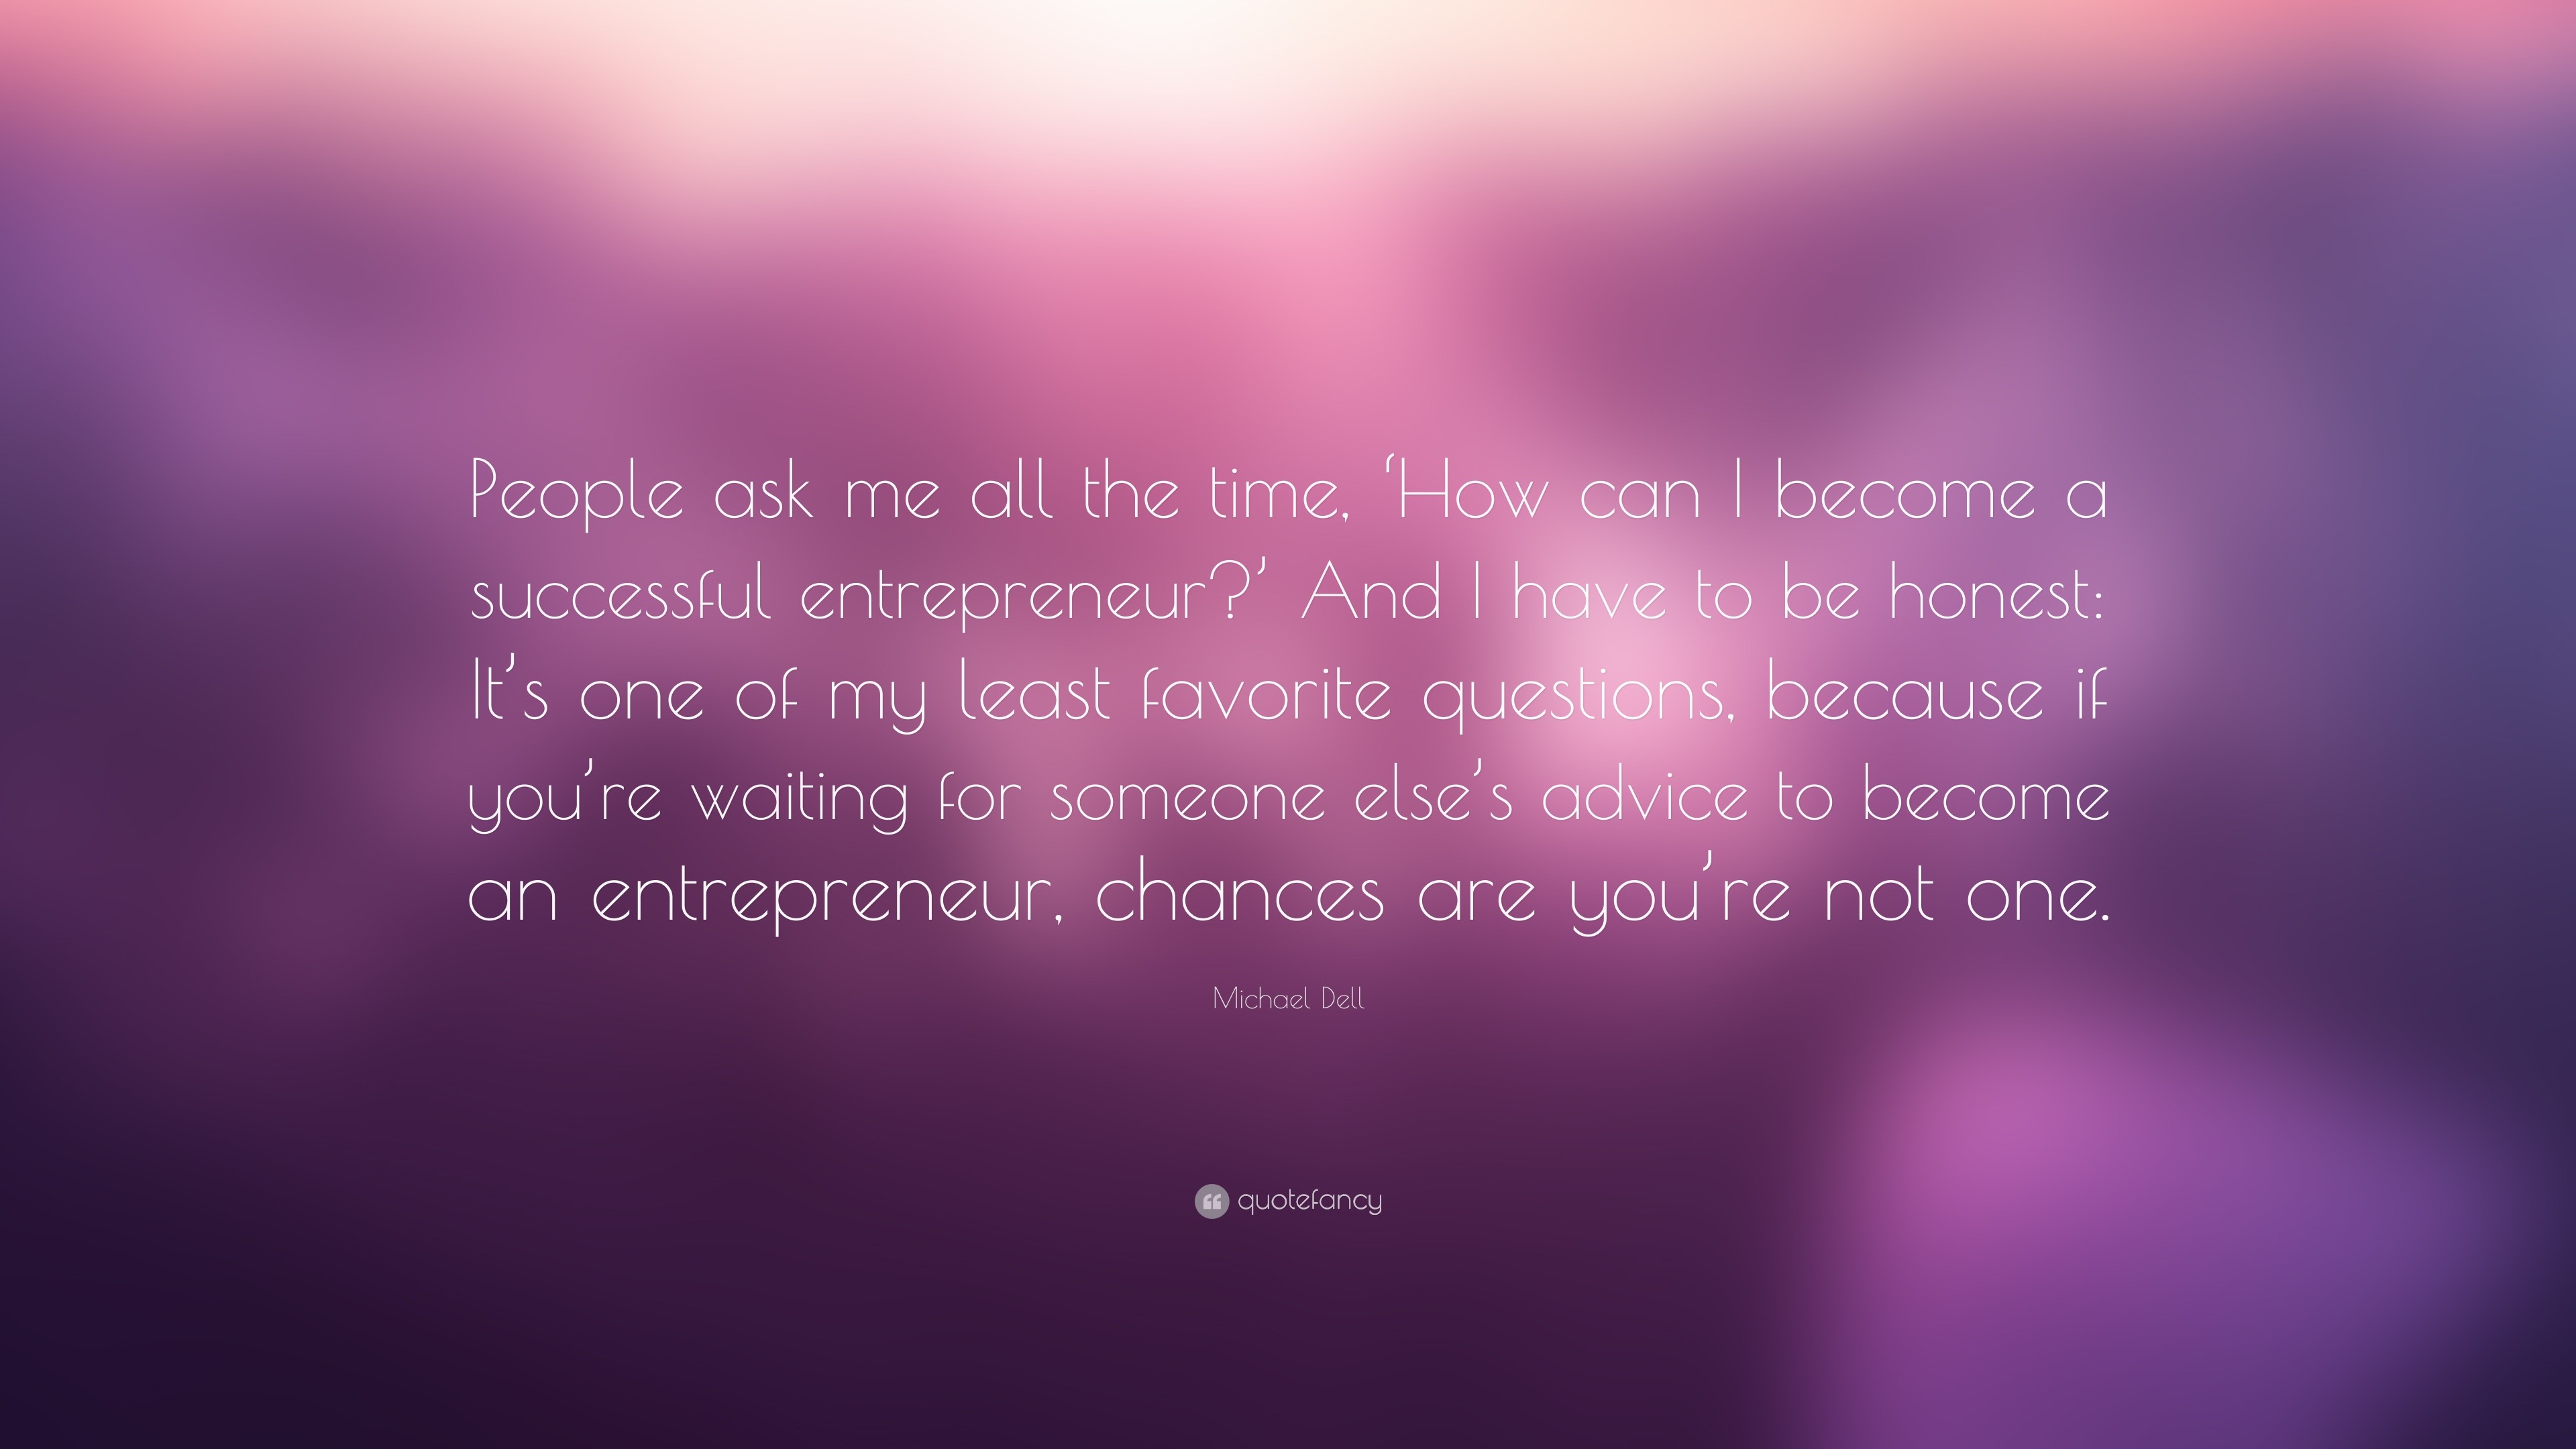 Michael Dell Quotes 49 Wallpapers Quotefancy